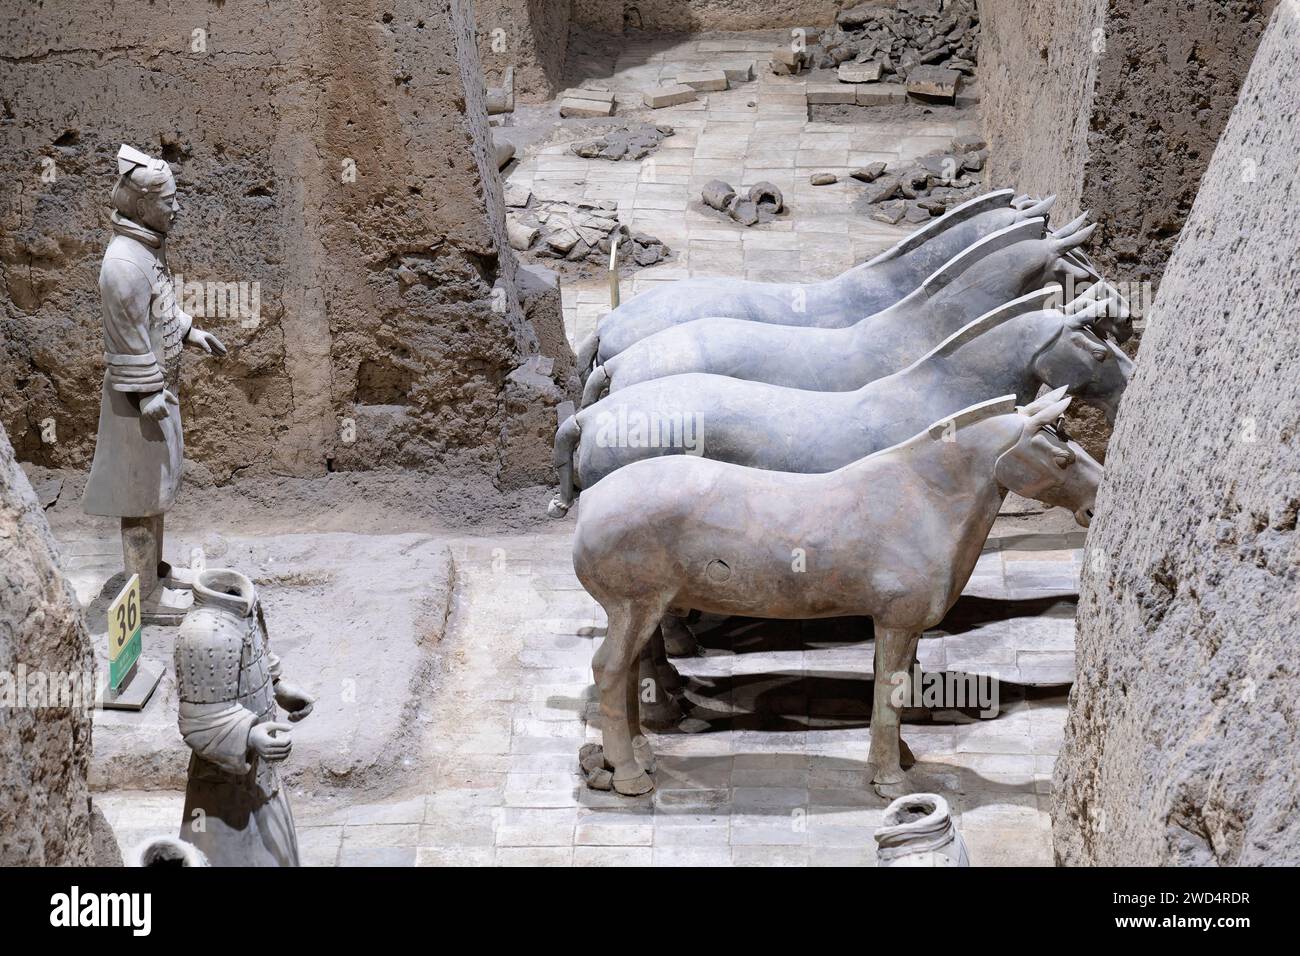 Remains of Chariot Horses with a Driver, Command Pit 3, Terracotta Warriors Museum, Xian, China Stock Photo